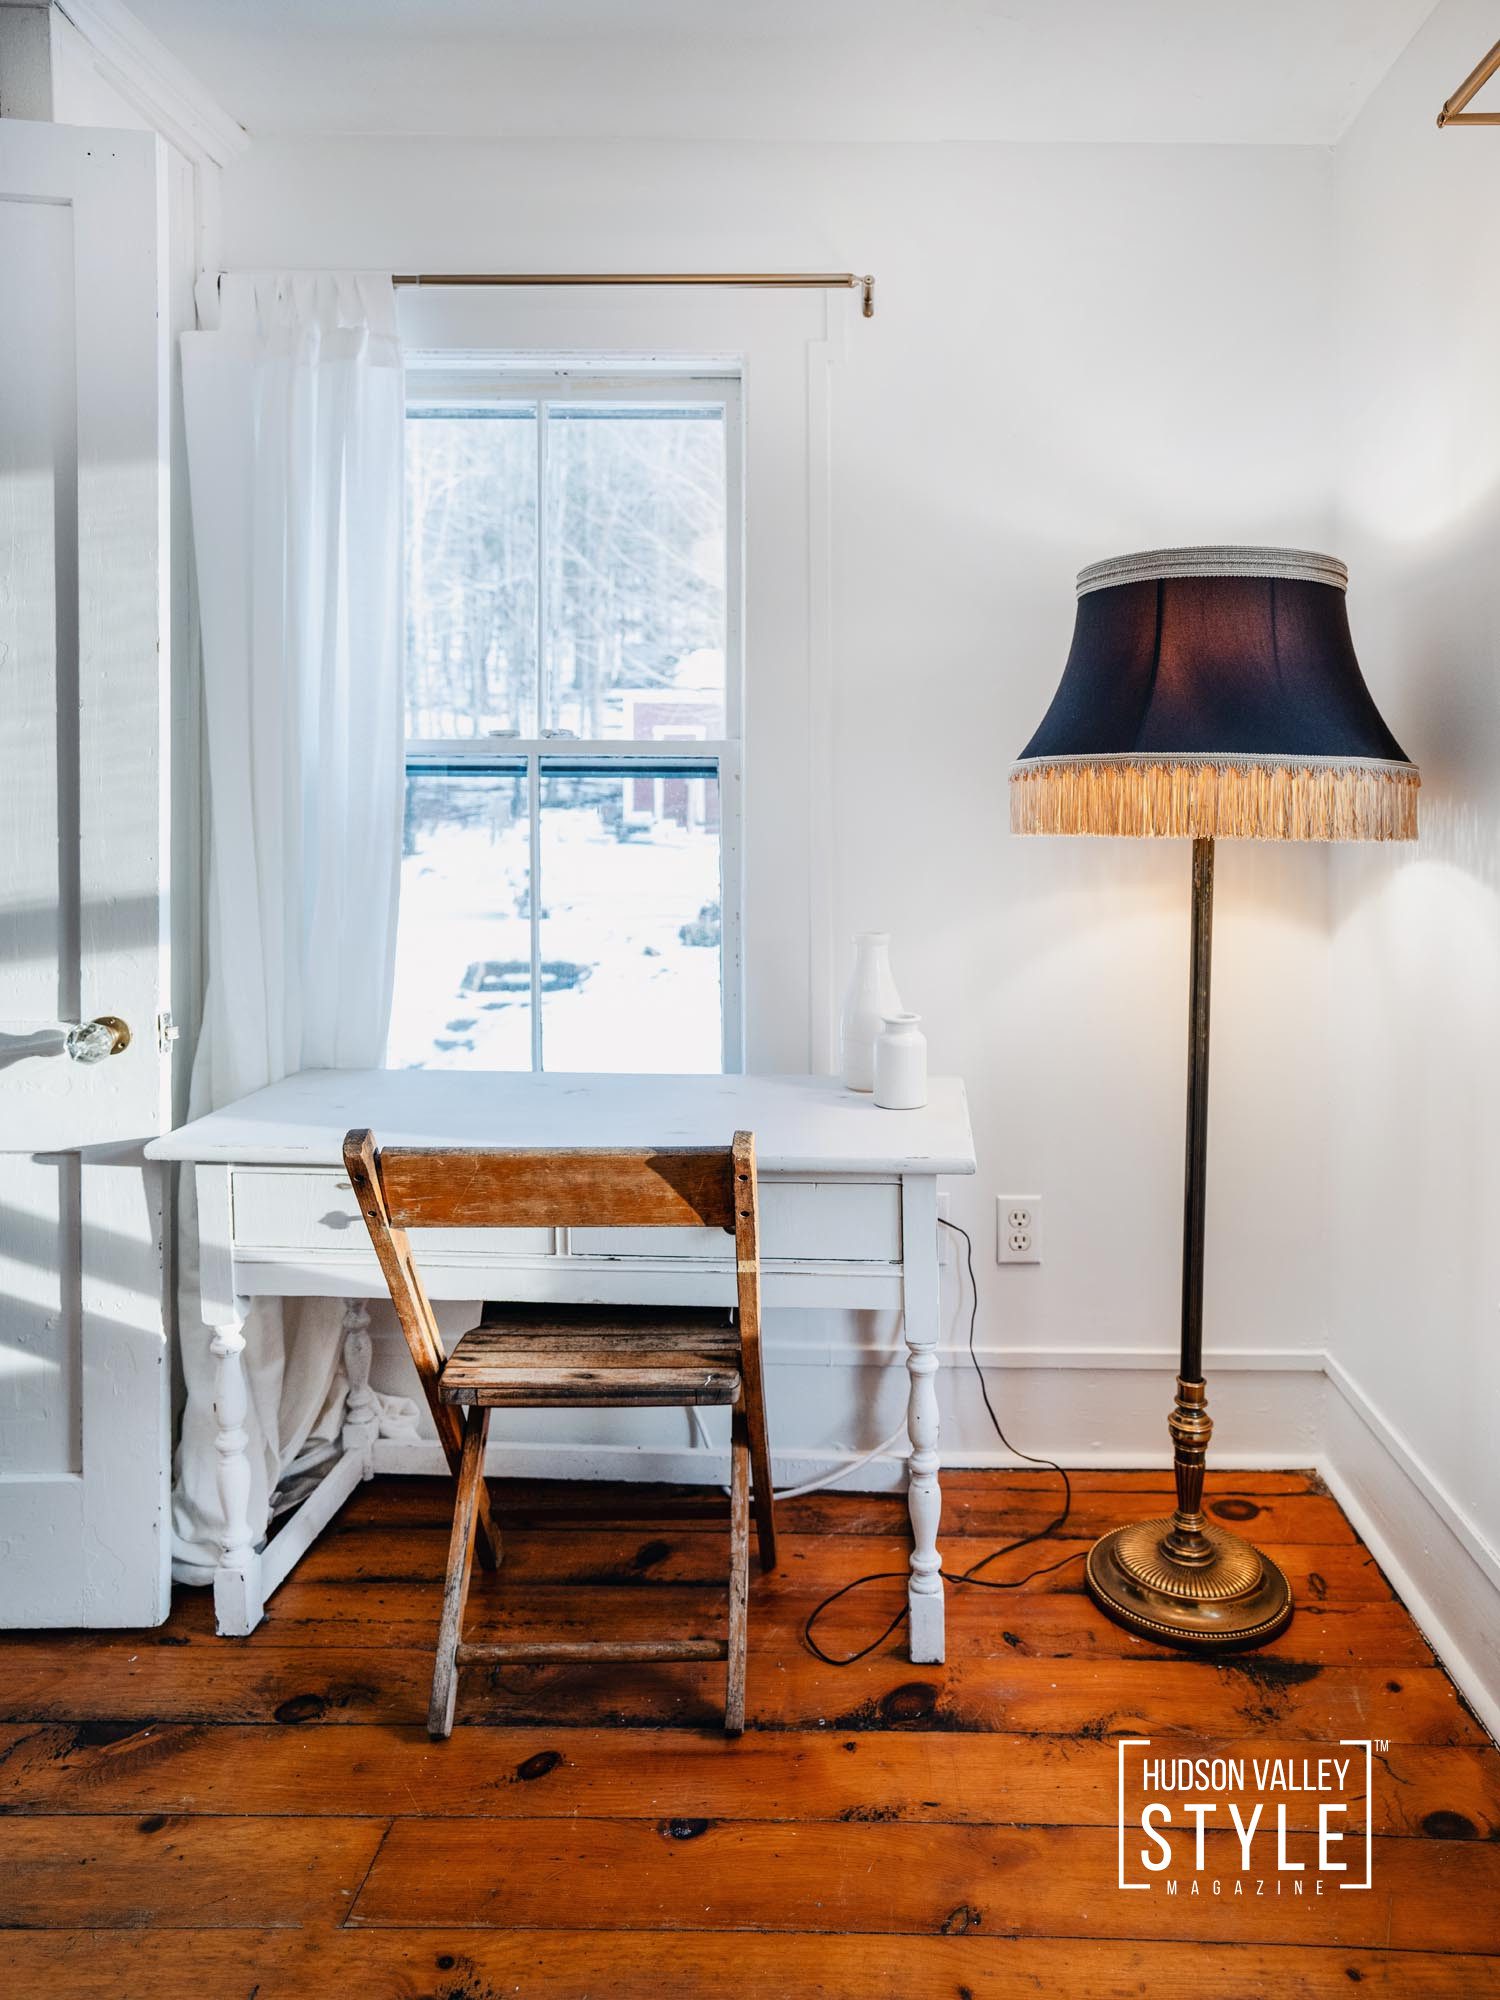 Experience Unforgettable Rustic Charm and Modern Flair in the Catskill Mountains at this Unique Farmhouse – Airbnb Review by Travel Photographer Maxwell Alexander